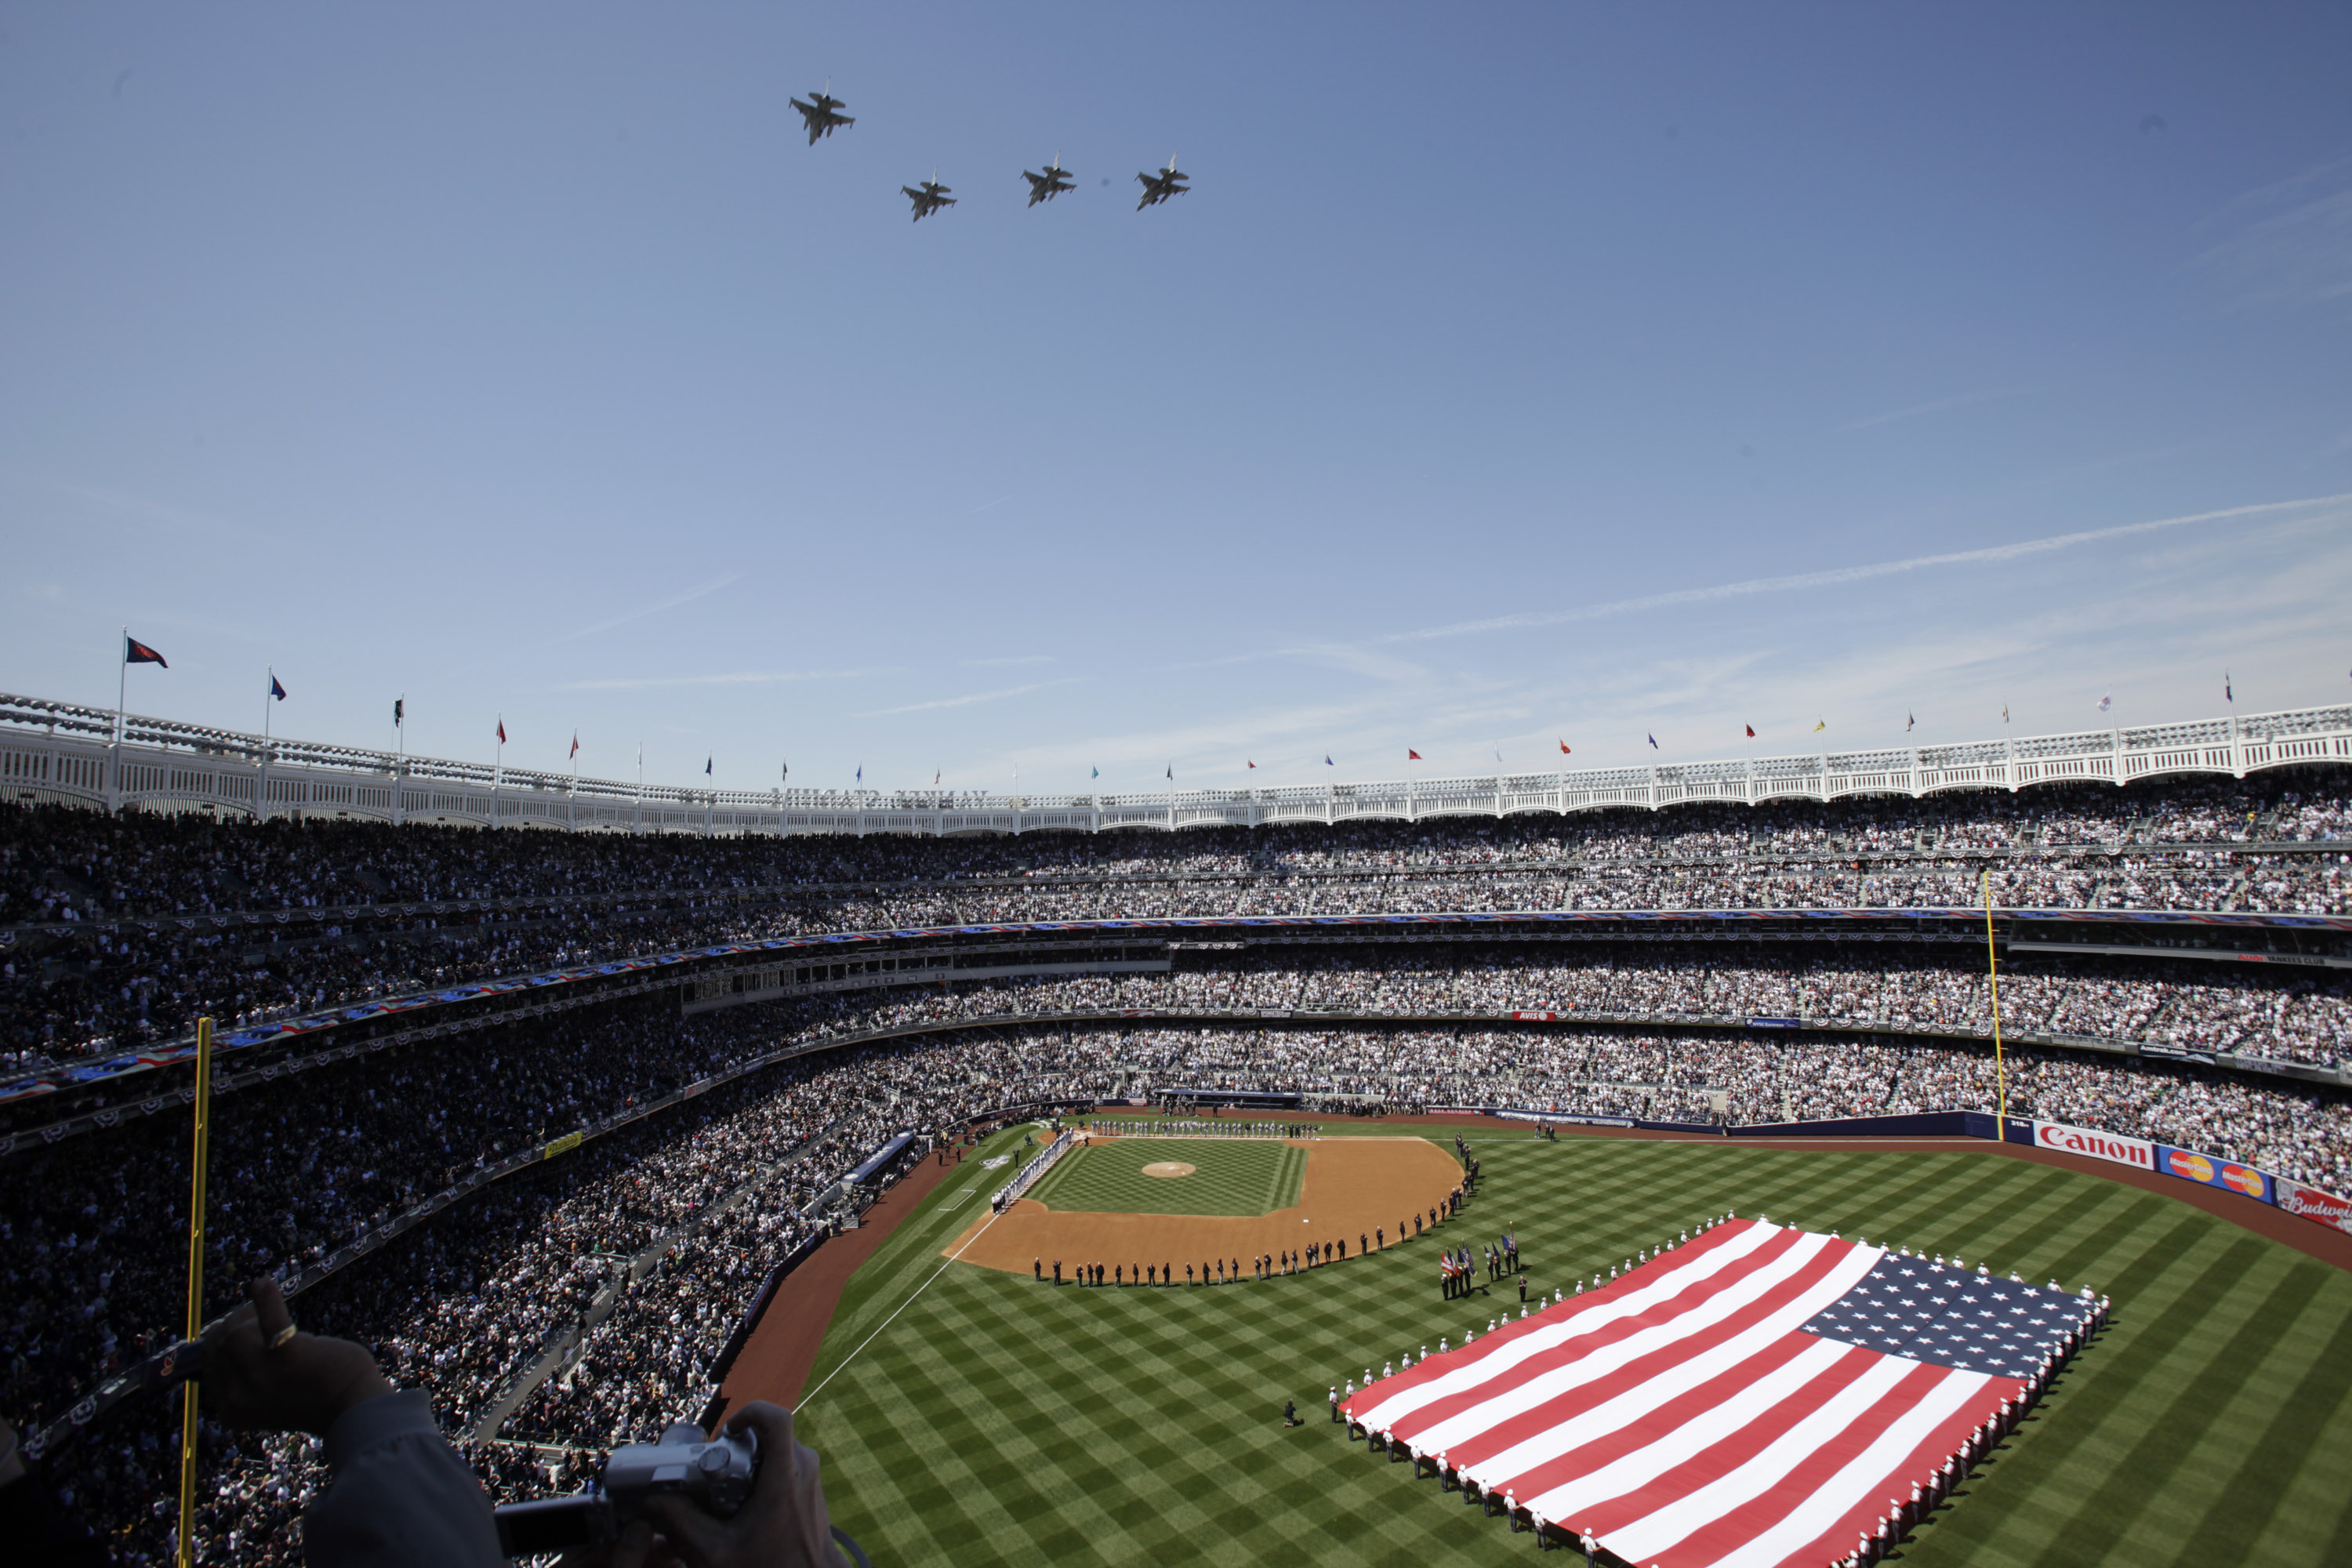 The 174th Fighter Wing In Syracuse Fly Over New Yankee Stadium